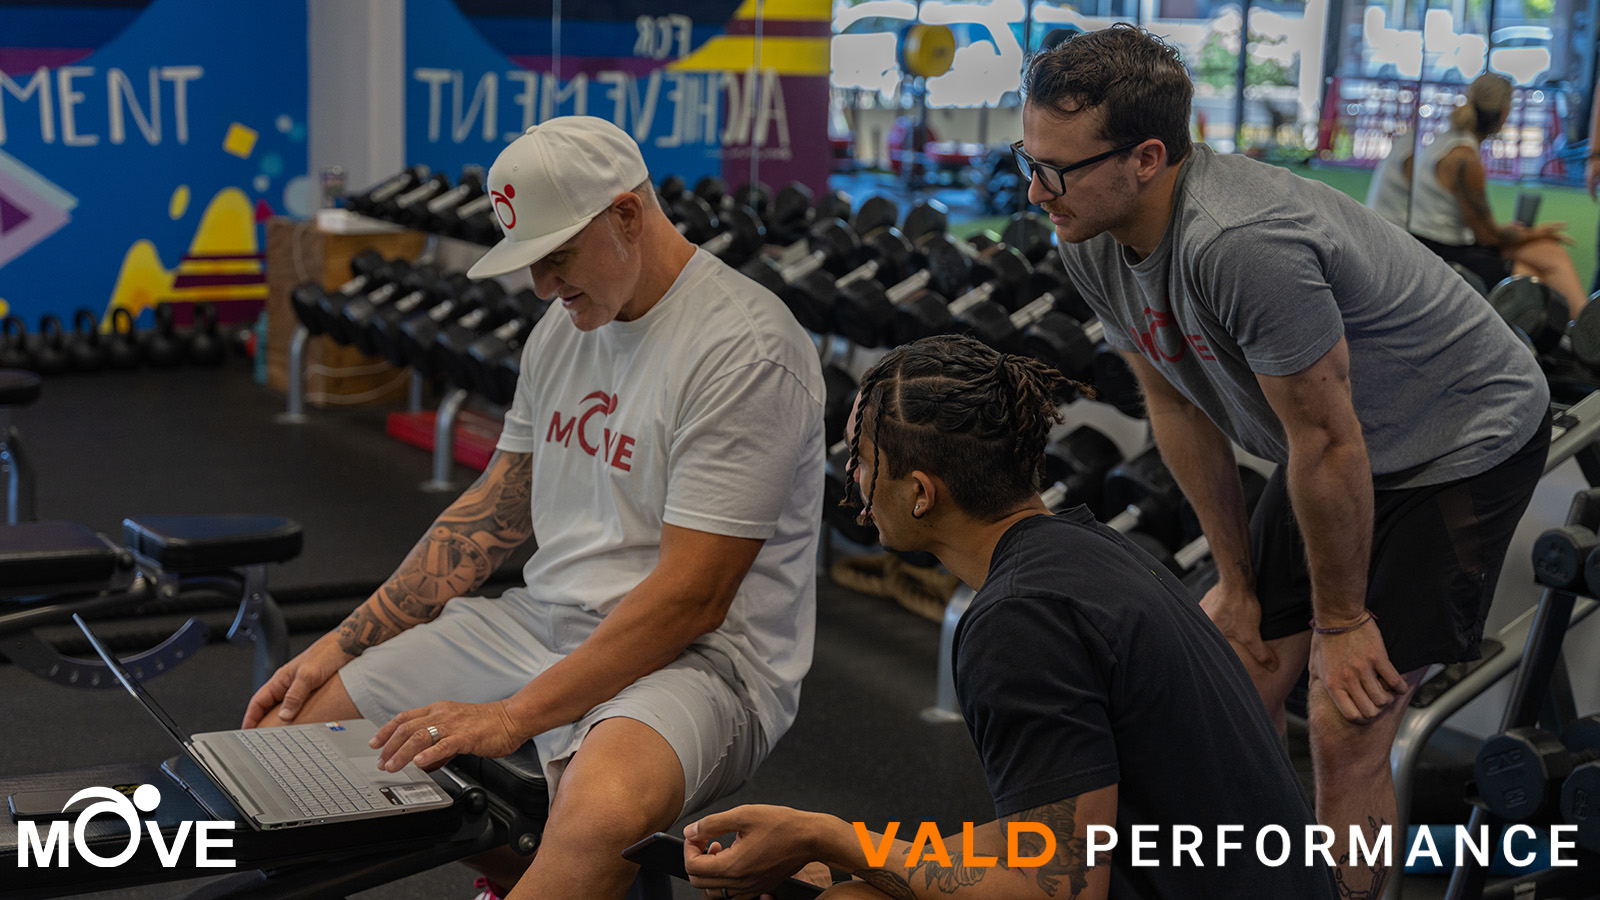 Elevating Performance and Recovery: How Move Human Performance Center in Chandler, Arizona, Utilizes VALD Performance